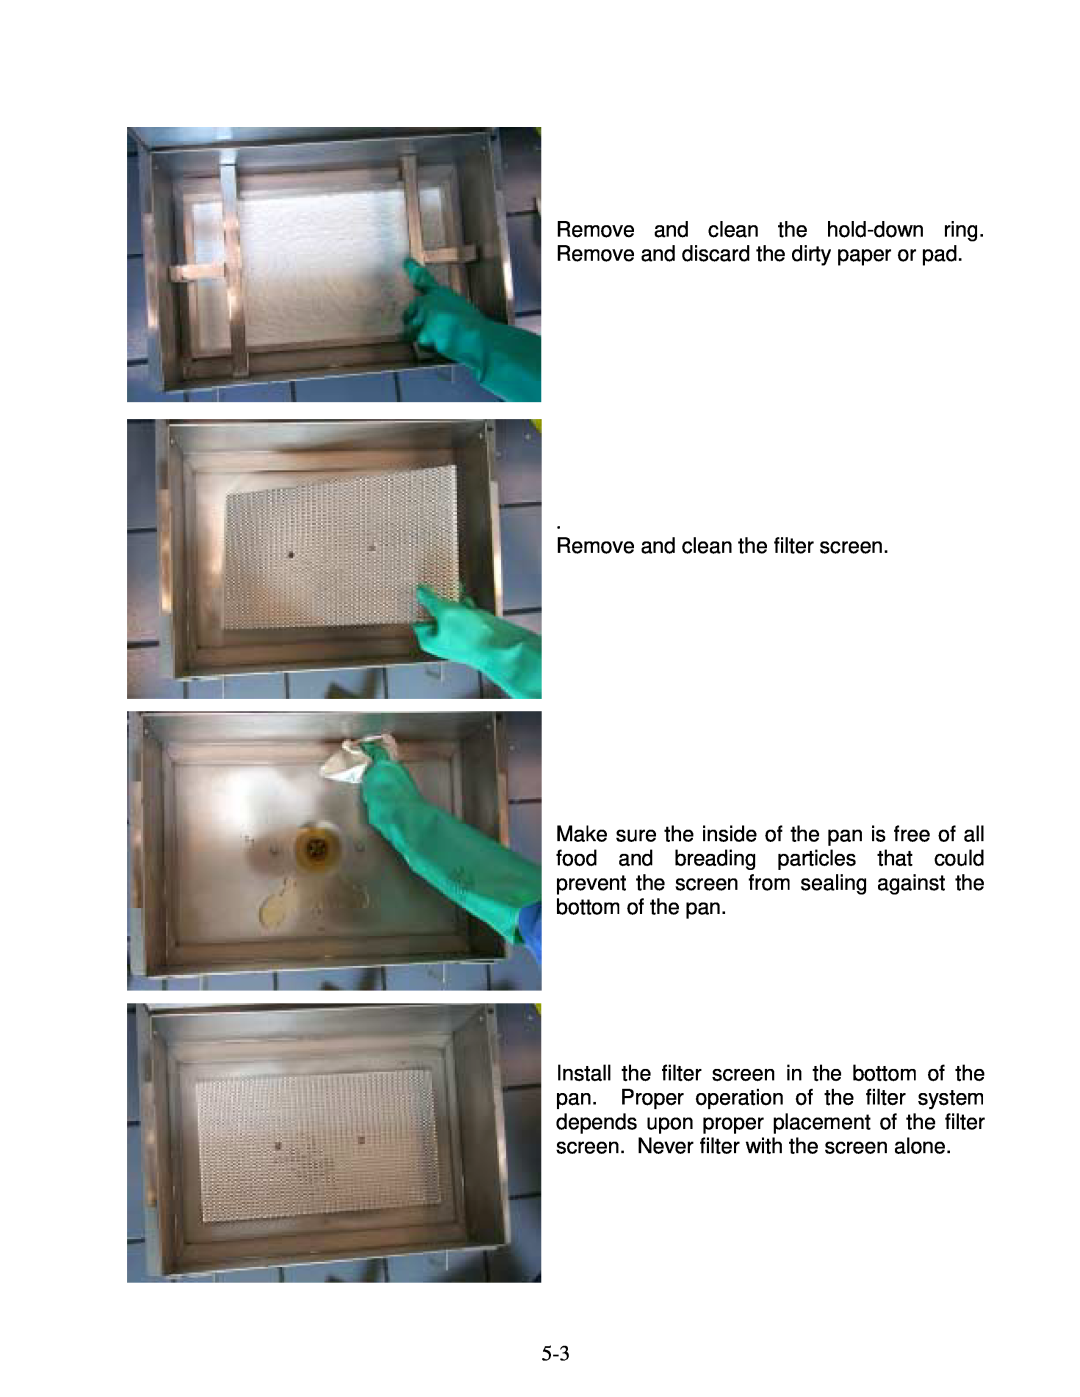 Frymaster H14 Series service manual Remove and clean the filter screen 